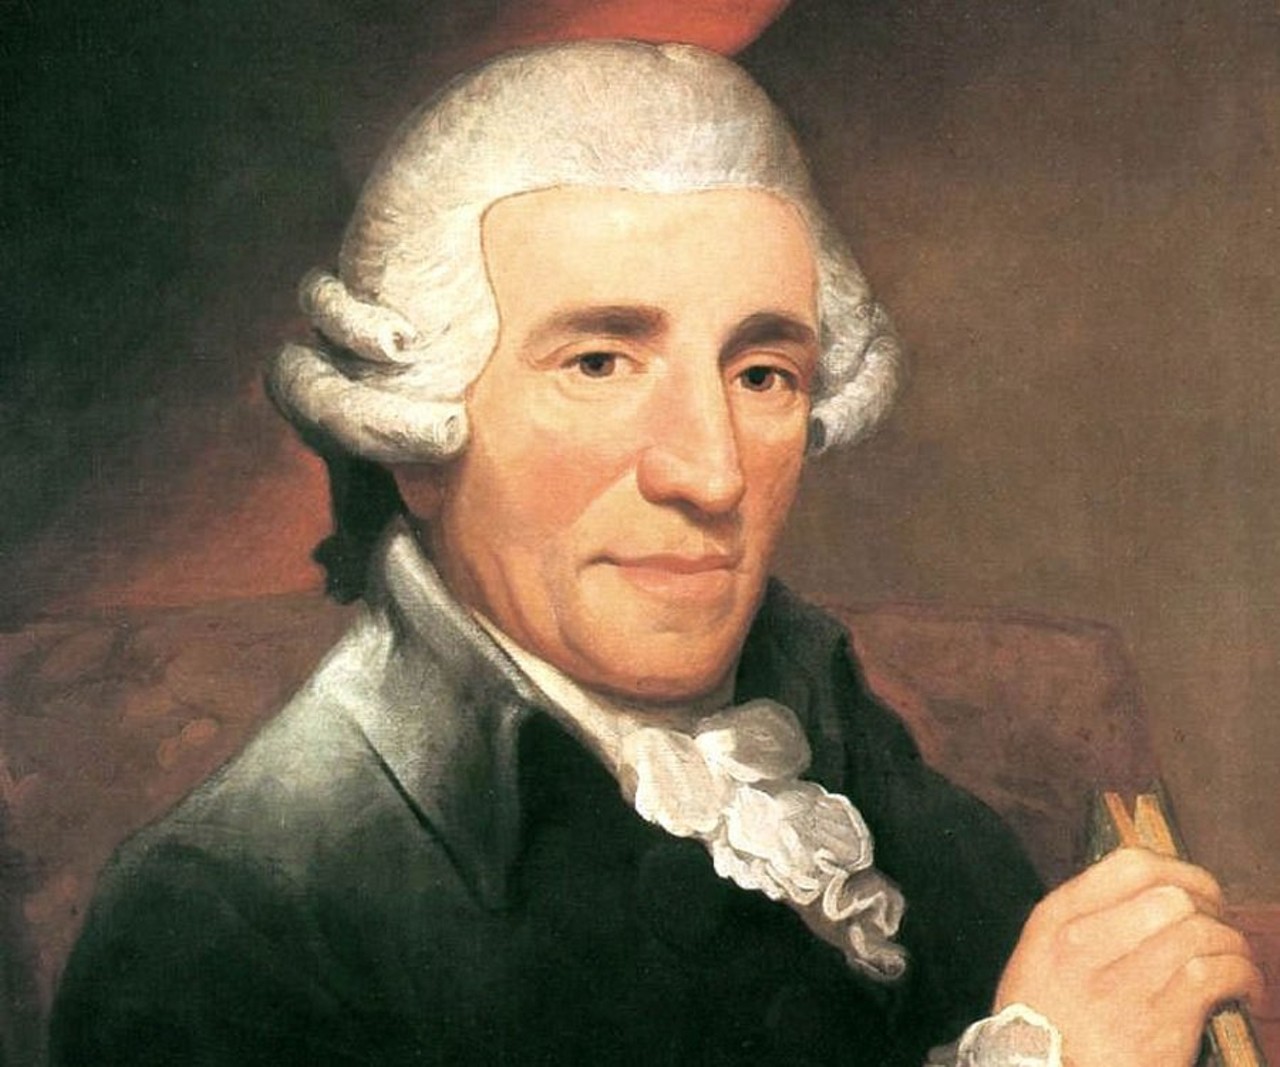 Haydn's Miracle with the Cleveland Orchestra
Thu, May 18
Photo via Wikipedia